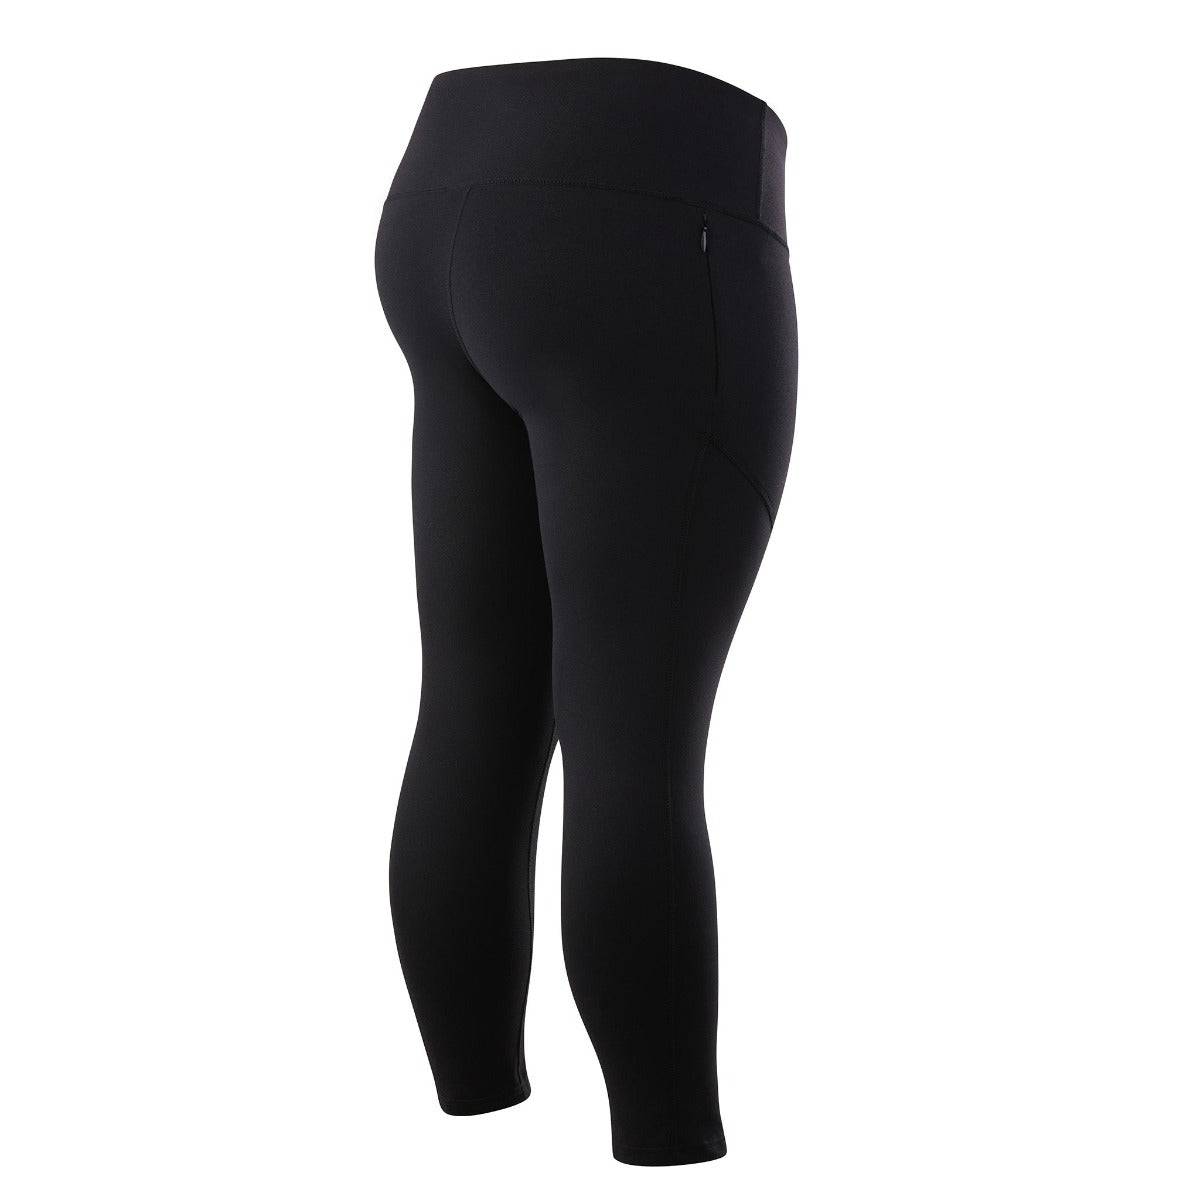 Victoria Stag's 3/4 length high rise leggings back